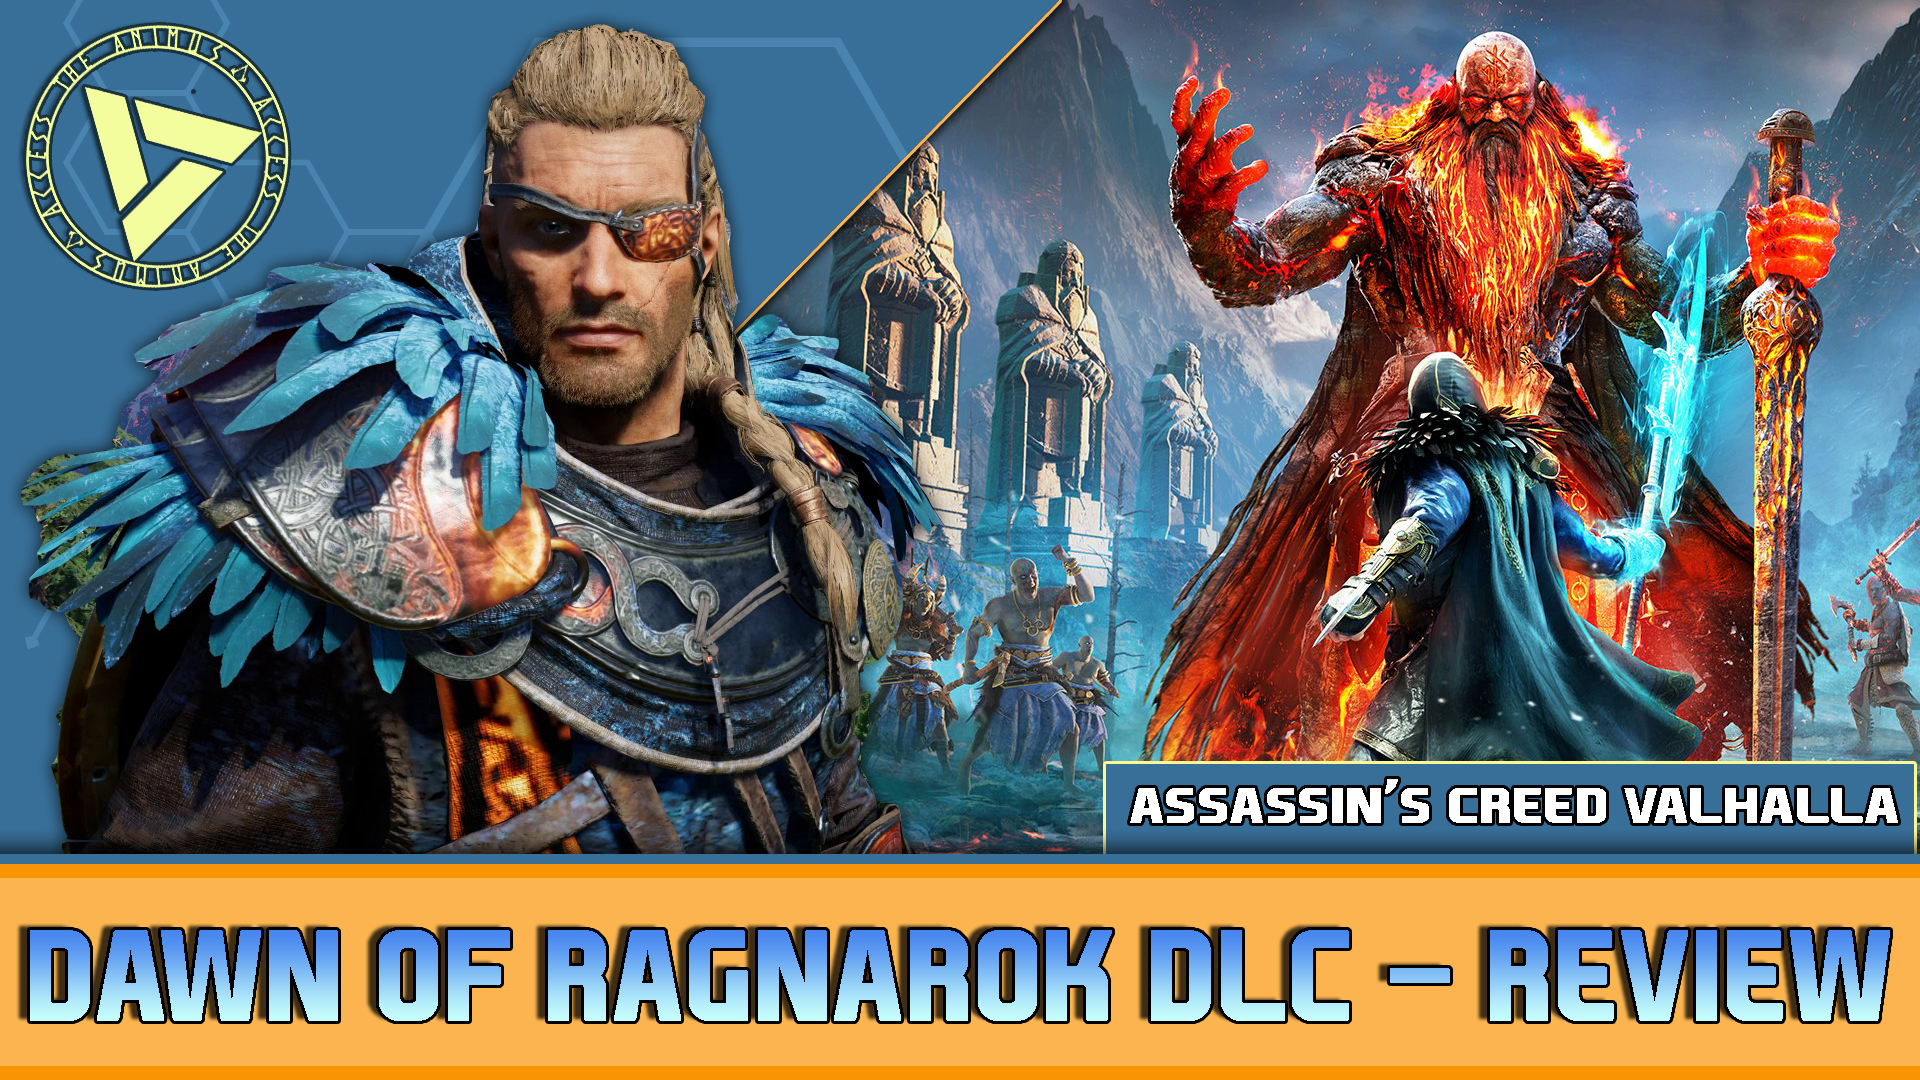 Assassin's Creed Valhalla: Dawn of Ragnarök Out Now